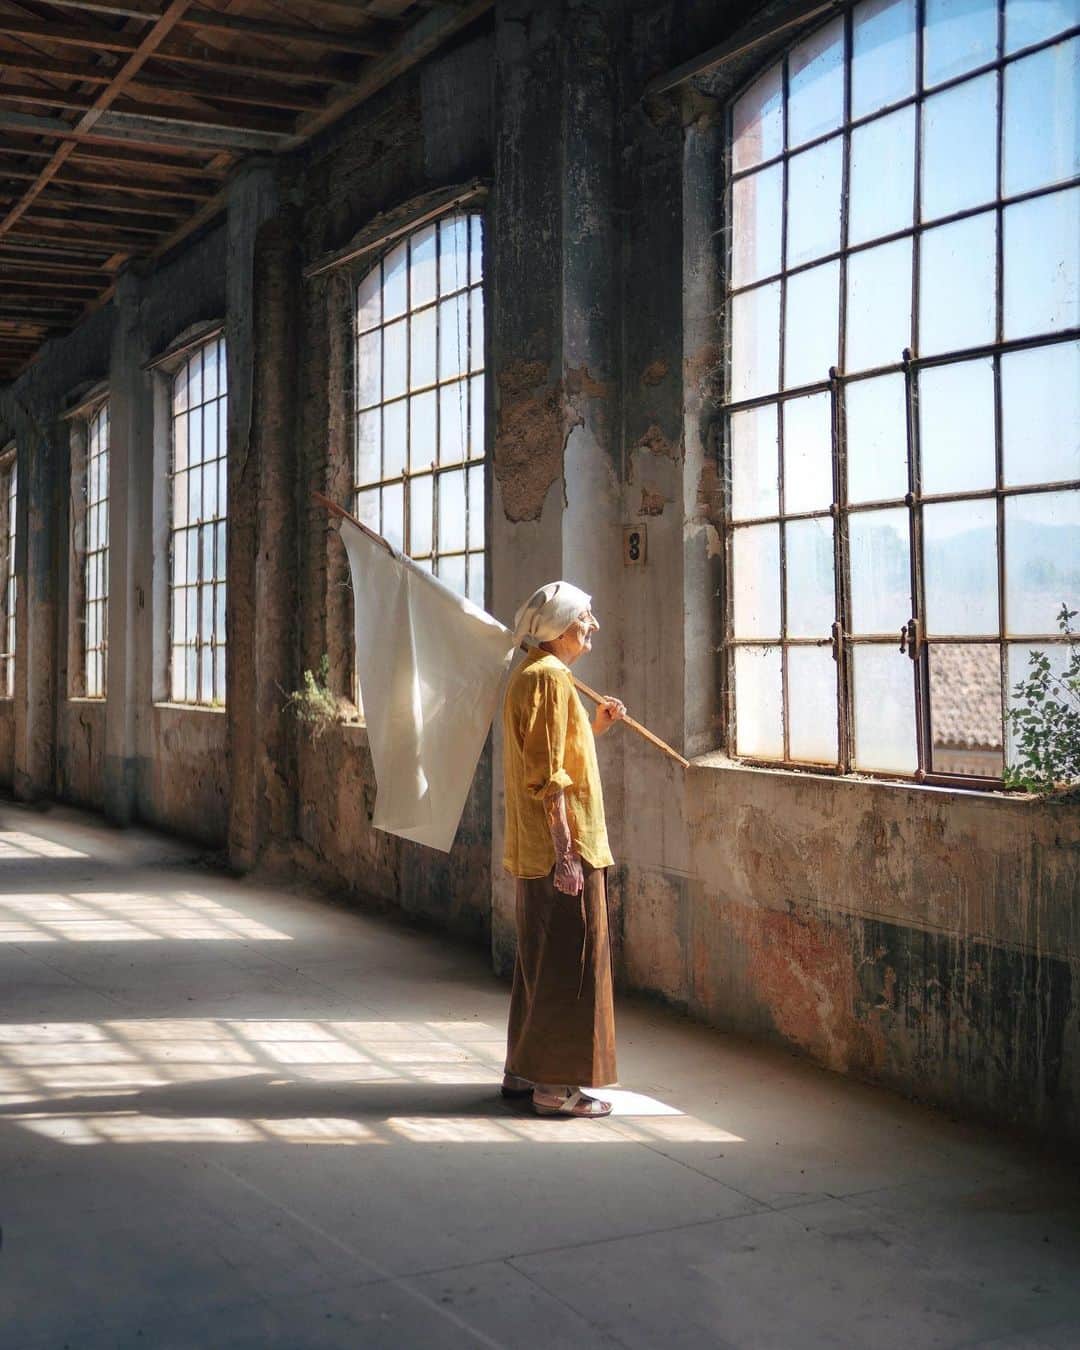 Simone Bramanteのインスタグラム：「{ Paper Mill Portraits } • This weekend was the inauguration of the exhibition of my artistic residence in Fabriano.  It was very exciting to see the people I portrayed in the now empty historic factory.  Each story is a value of the relationship between the locals and the factory.  These photos with the entire work are visible this month at the exhibition at @fondazione_fedrigoni_fabriano in Fabriano.  Grazie a tutte le persone che sono venute a vedere il mio lavoro!   Thanks to the curators @umberto_giovannini  @beatricelevorato   and the videomaker @jacoponannibartolucci   #imaginarymagnitude #photocinematica #oftheafternoon #naturelovers #oldtonecollective #lensculture #exploreobserveshare #agameoftones #subjectivelyobjective #noicemag #thisveryinstant #archivecollectivemag #myfeatureshoot #hippomag #fadedaesthetics #artofvisuals #solarcollective #rentalmag #moodmagic #stademagazine #gamutmag #thedreamersplace #takemagazine #negativemag #thinkverylittle #oblivionmagazine」